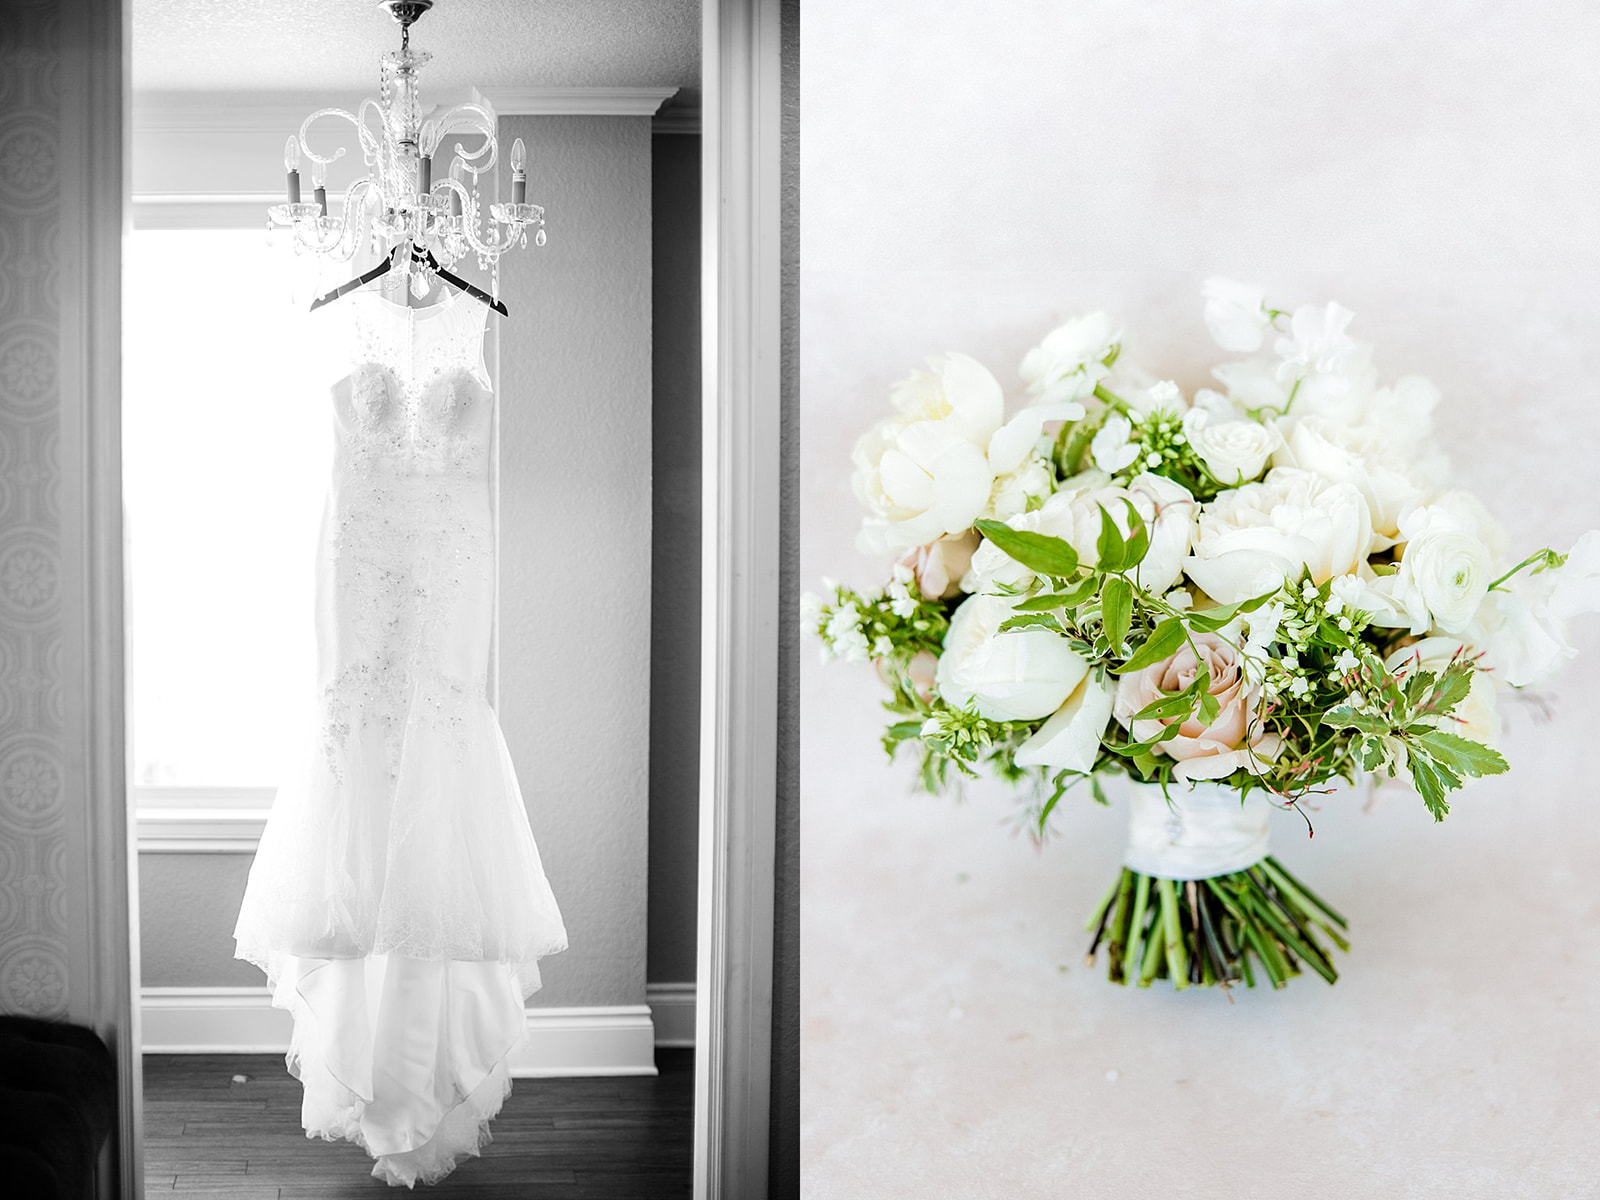 Wedding Gown Photo and Bouquet 